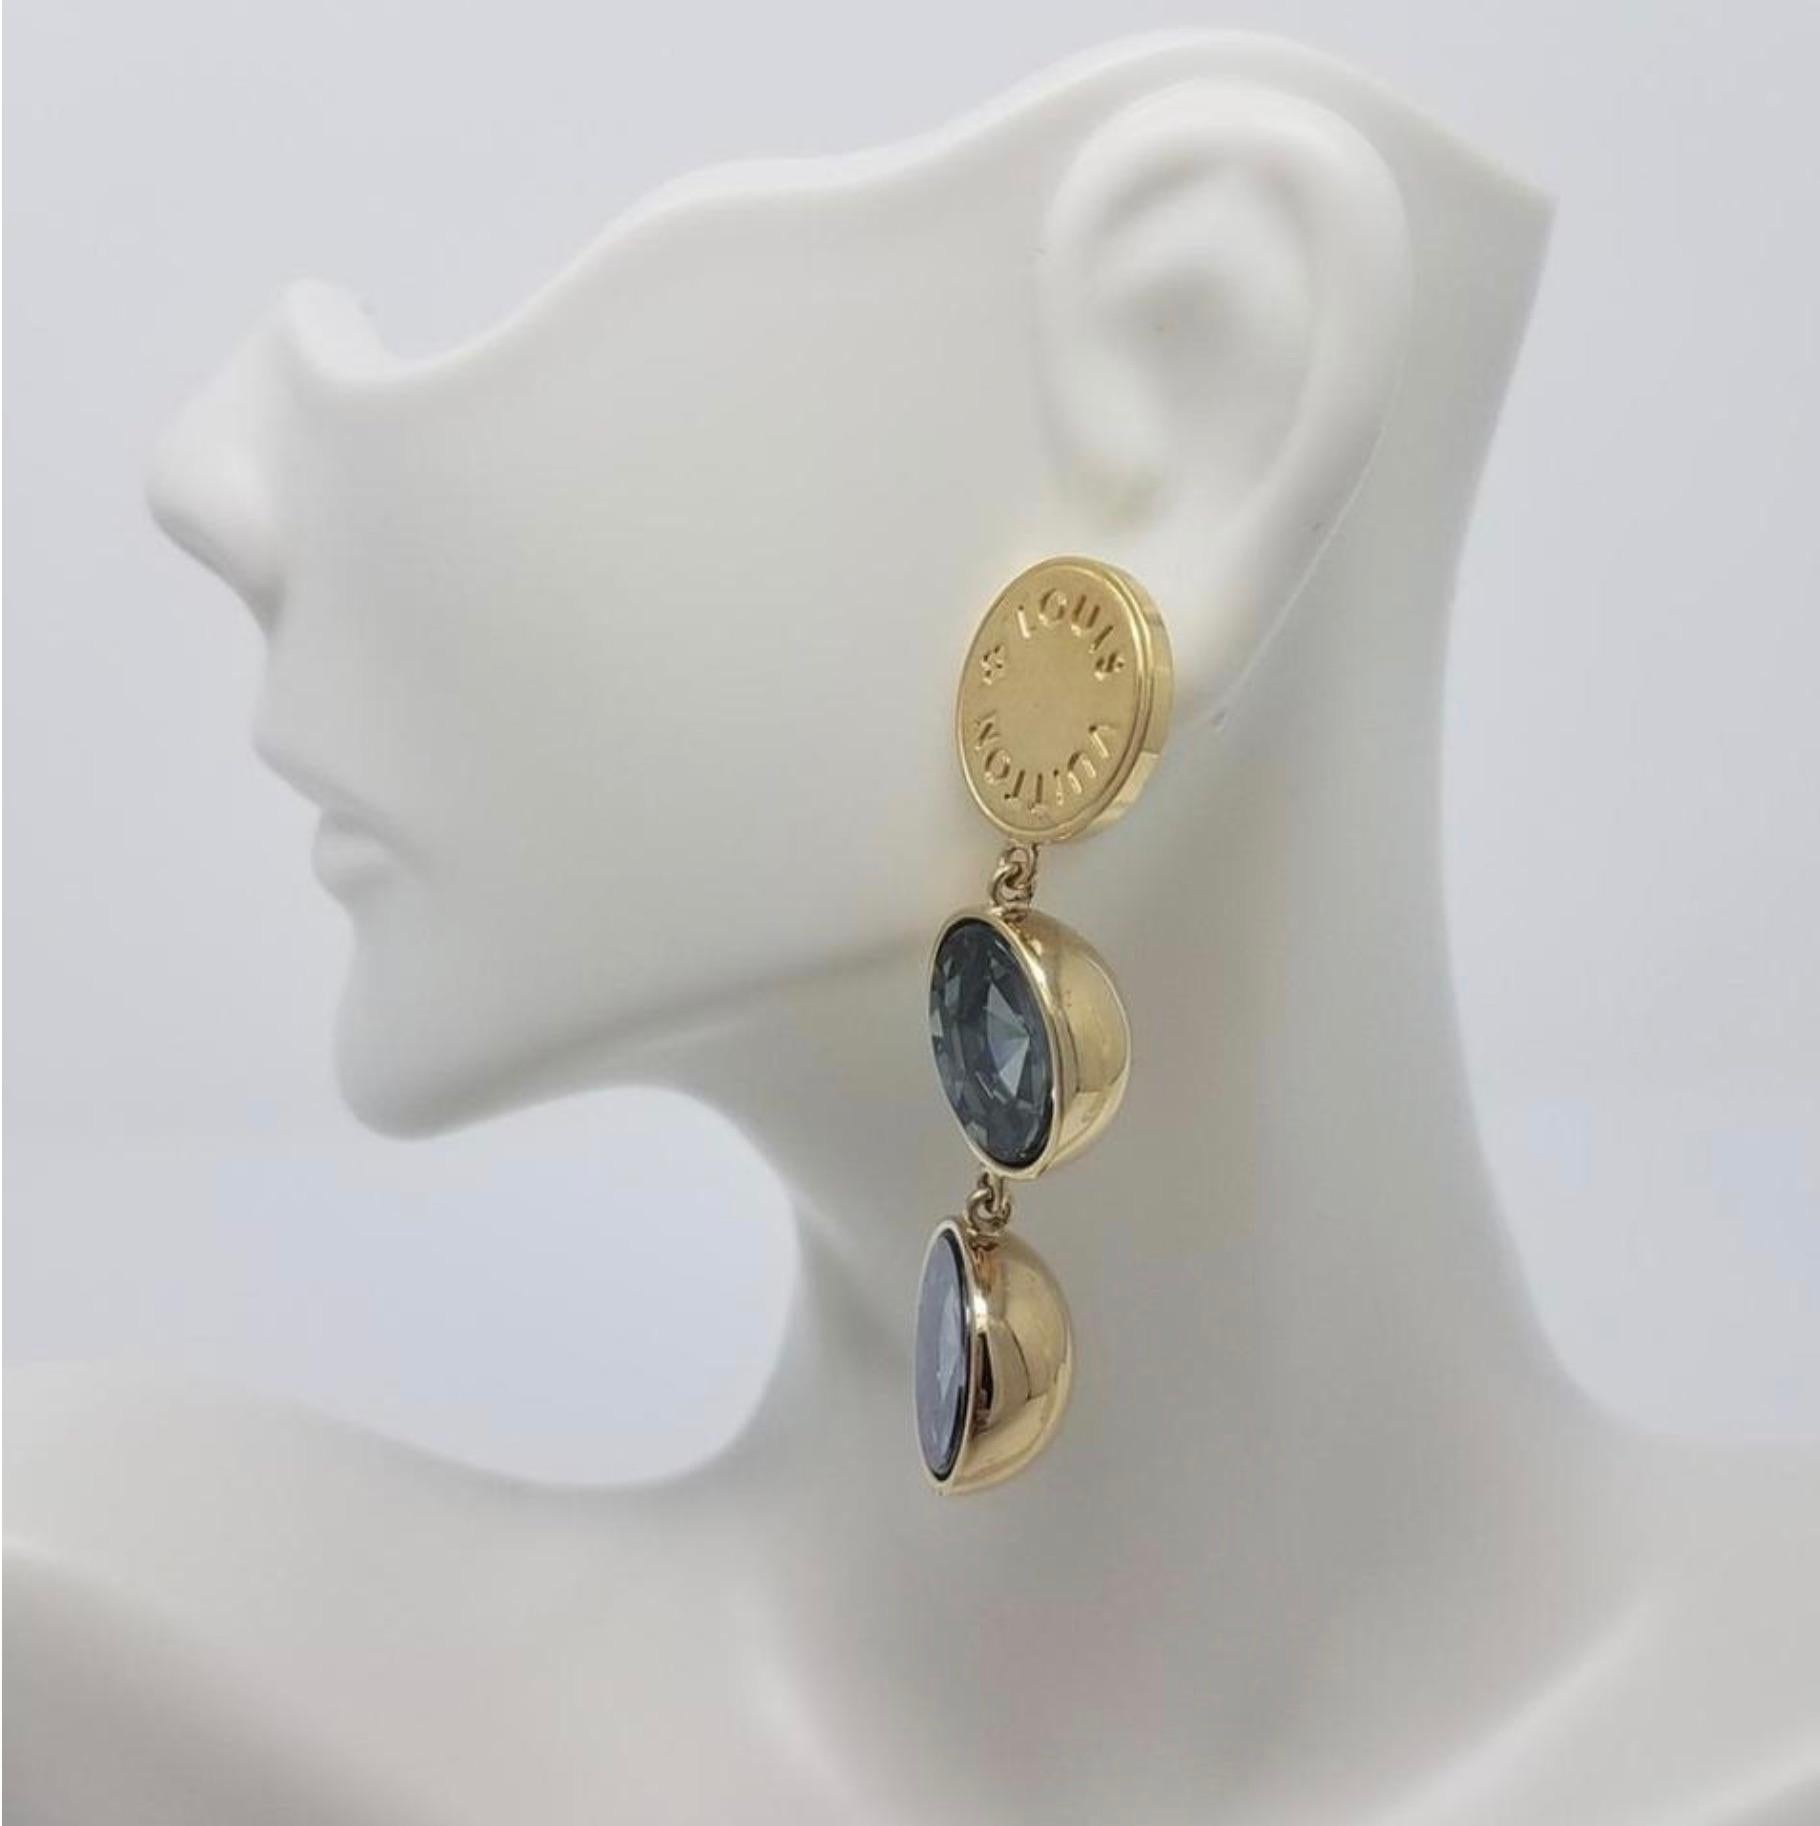 MODEL - Louis Vuitton Gold Swarovski Black Crystal Pierced Hanging Earrings

CONDITION - Exceptional! No signs of wear.

SKU - AIS-AS

ORIGINAL RETAIL PRICE - 660 + tax

MATERIAL - Gold and Swarovski Crystal

DIMENSIONS - L2.2 x H.3 x D.6

COMES